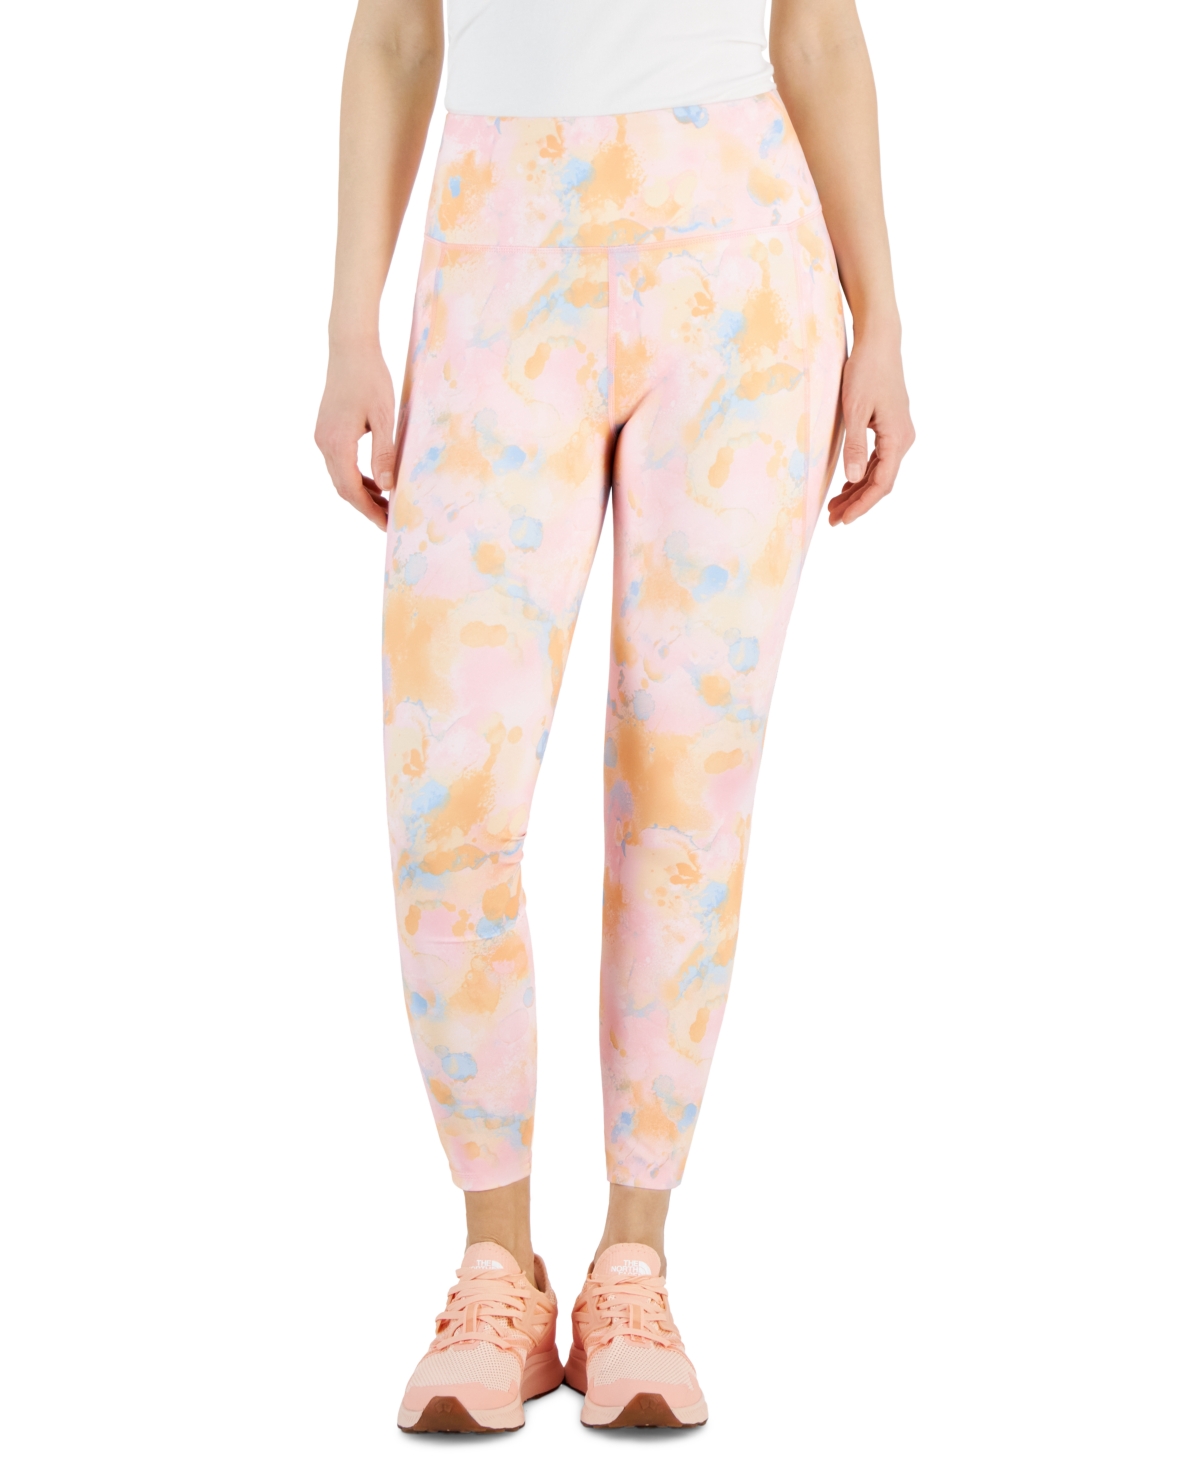 Women's Printed Cropped Compression Leggings, Created for Macy's - Pink Icing